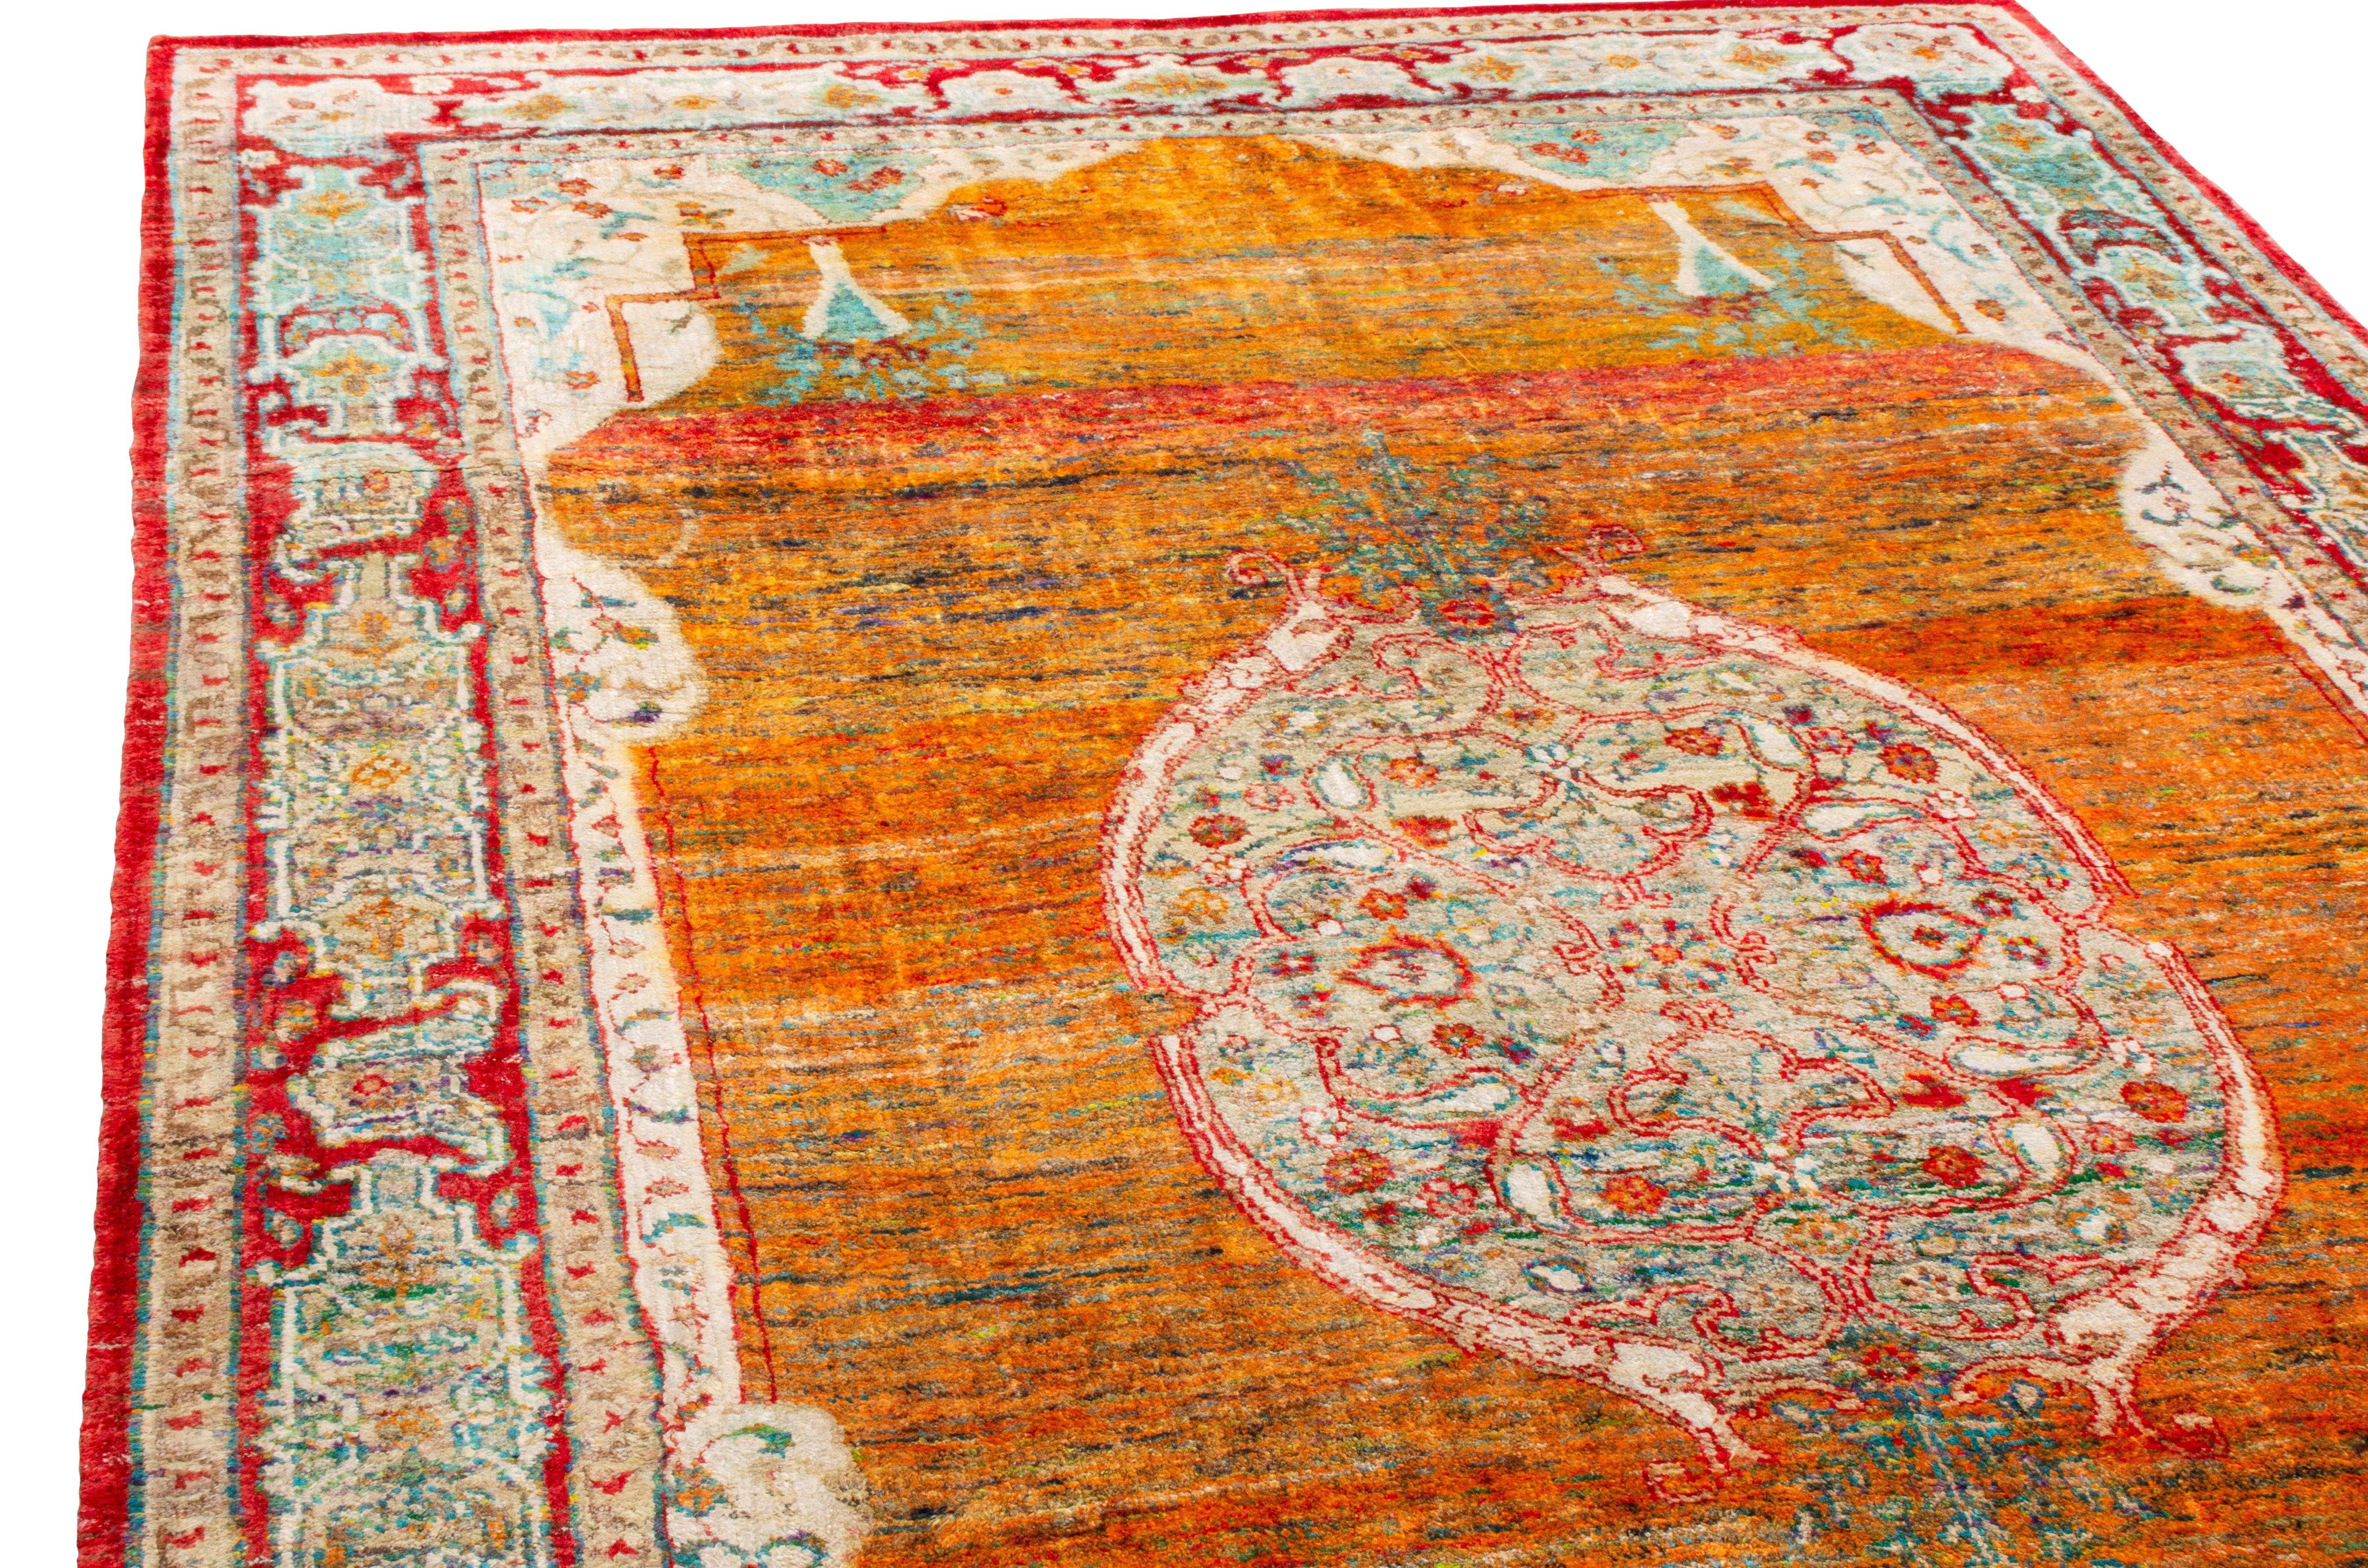 Originating from India, this new silk rug enjoys a tastefully unique background with an homage to an antique medallion field design. Hand knotted in lustrous, complementary silk, the abrash lengths of sunset orange, tangerine red, and cream yellow